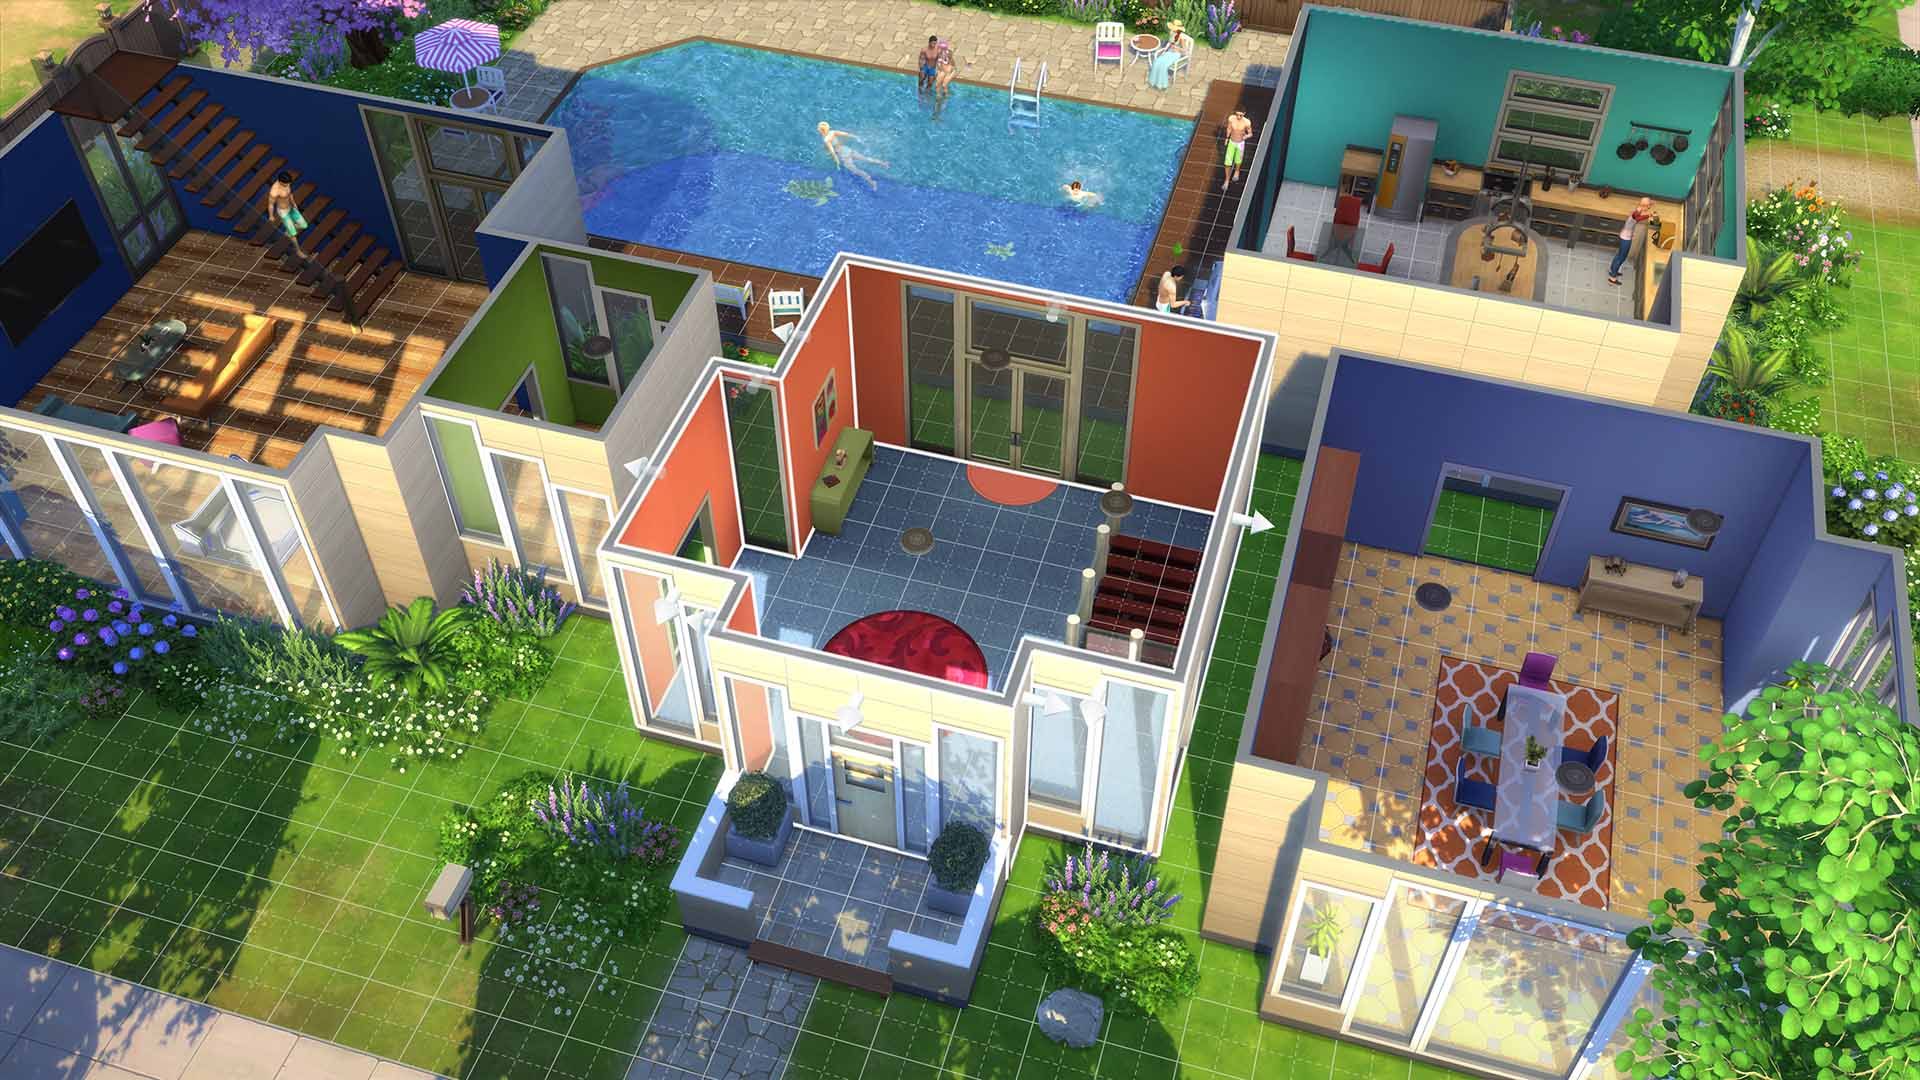 In this article, we are going to be covering how to show hidden objects in Sims 4, so you can find out about all of the objects in the game.